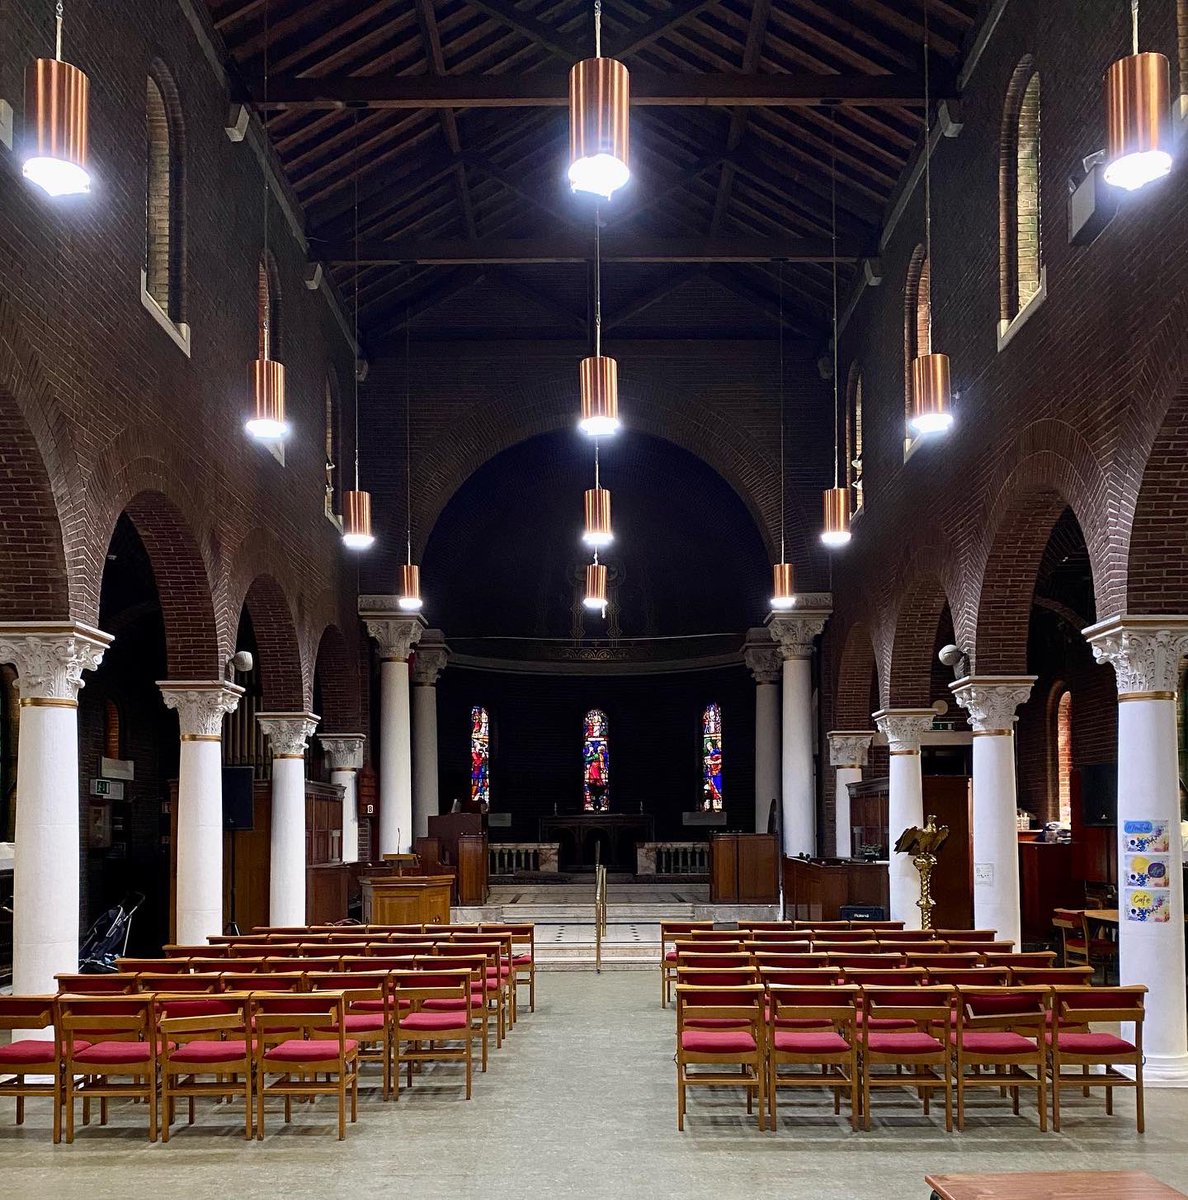 The monastic interior of St. Thomas’s Church, Cathal Brugha Street, provides an oasis of calm in Dublin city centre. It was designed in 1930 by one of the leading architects in early 20th-century Ireland, Frederick G. Hicks, whose oeuvre straddled classicism to early modernism 🧵